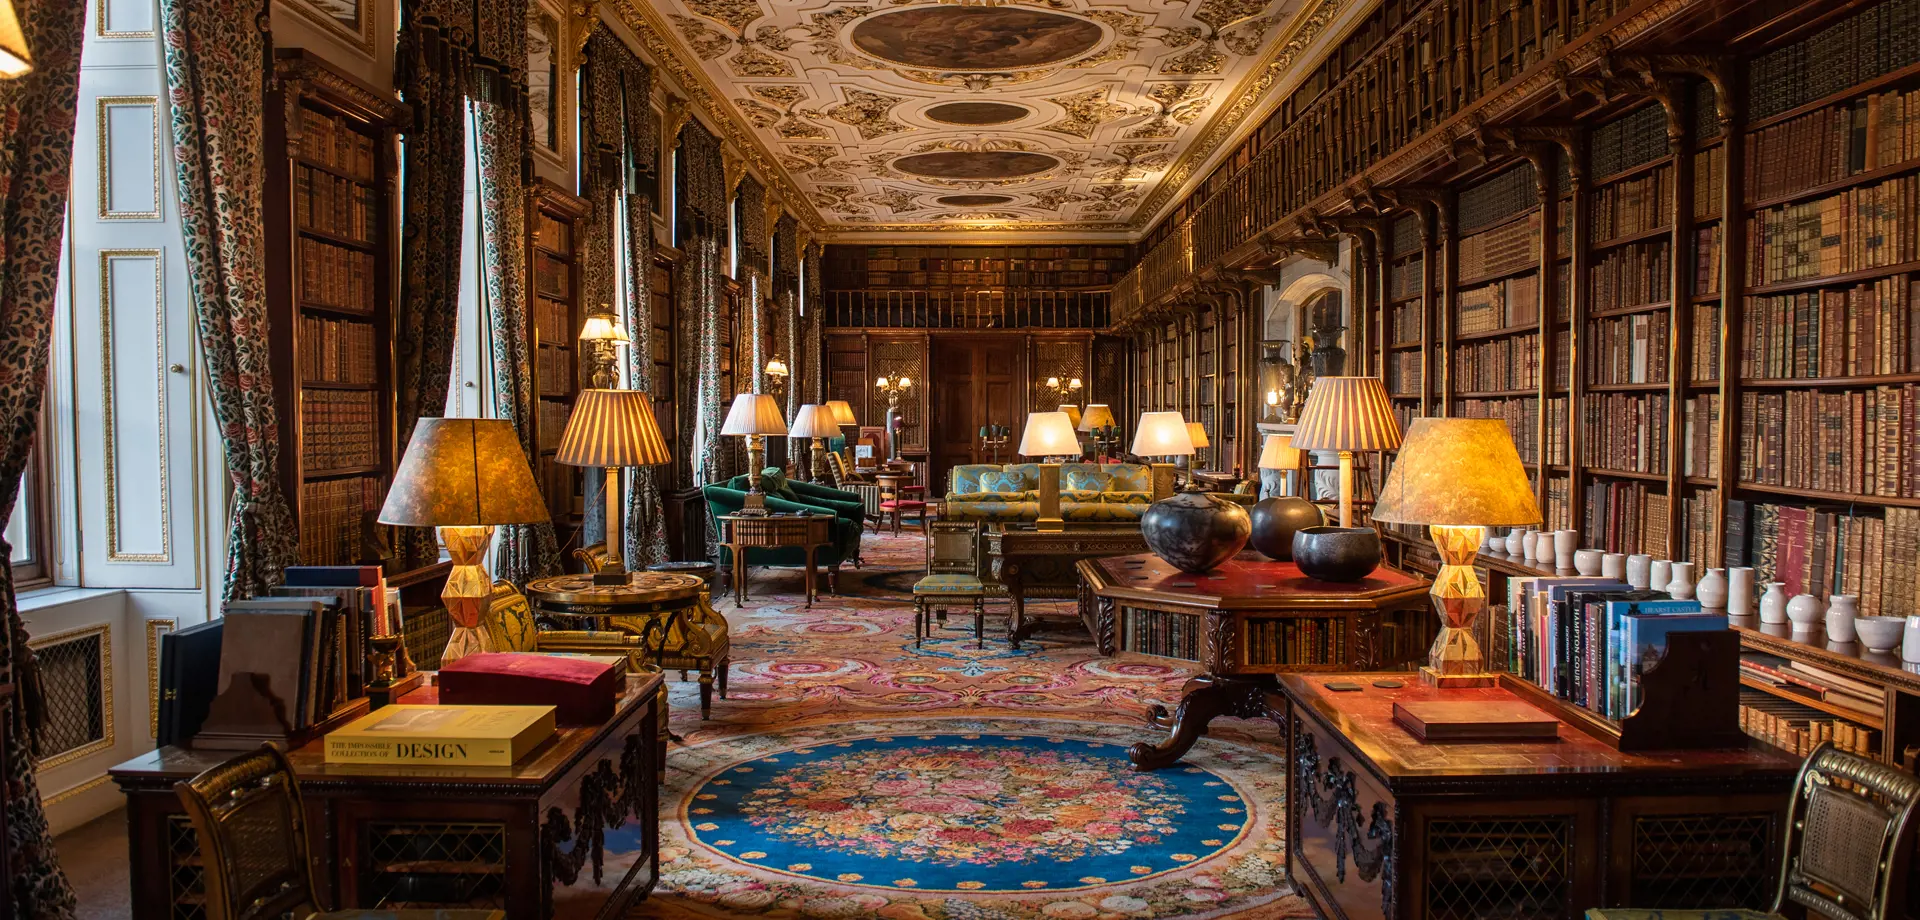 Chatsworth House online tour